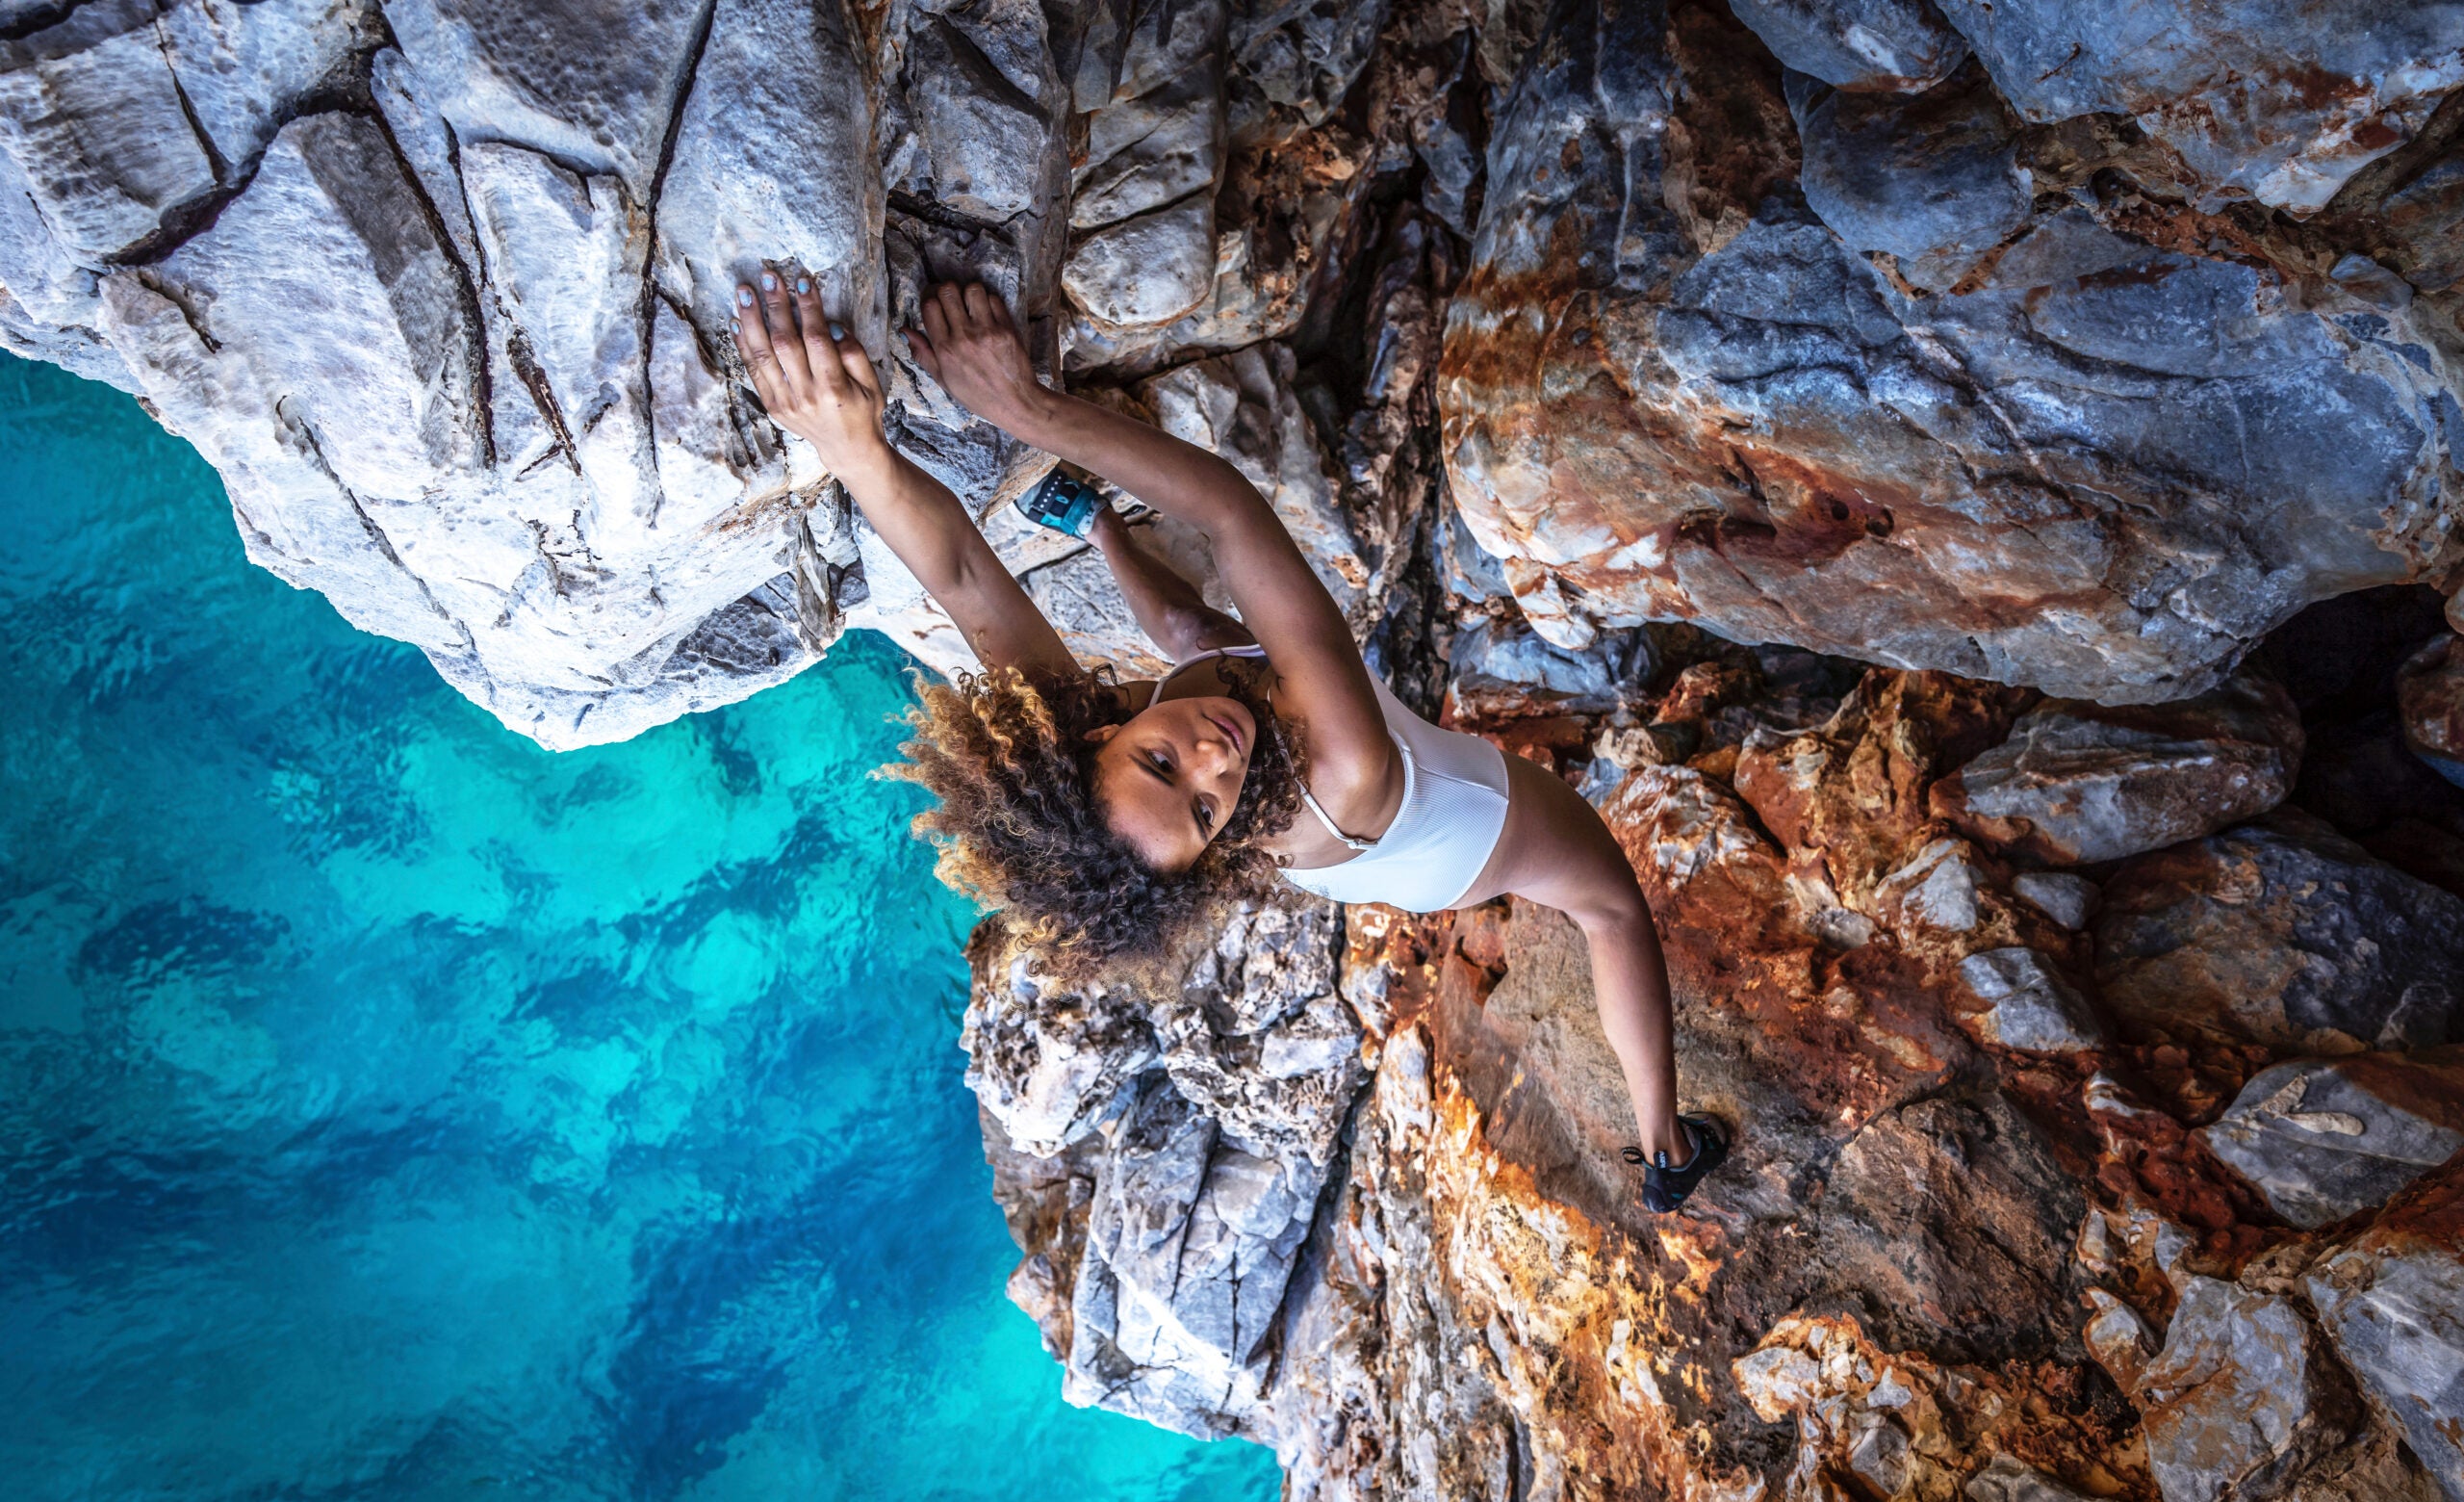 The Complete Guide to Taking Sick Climbing Photos - Climbing